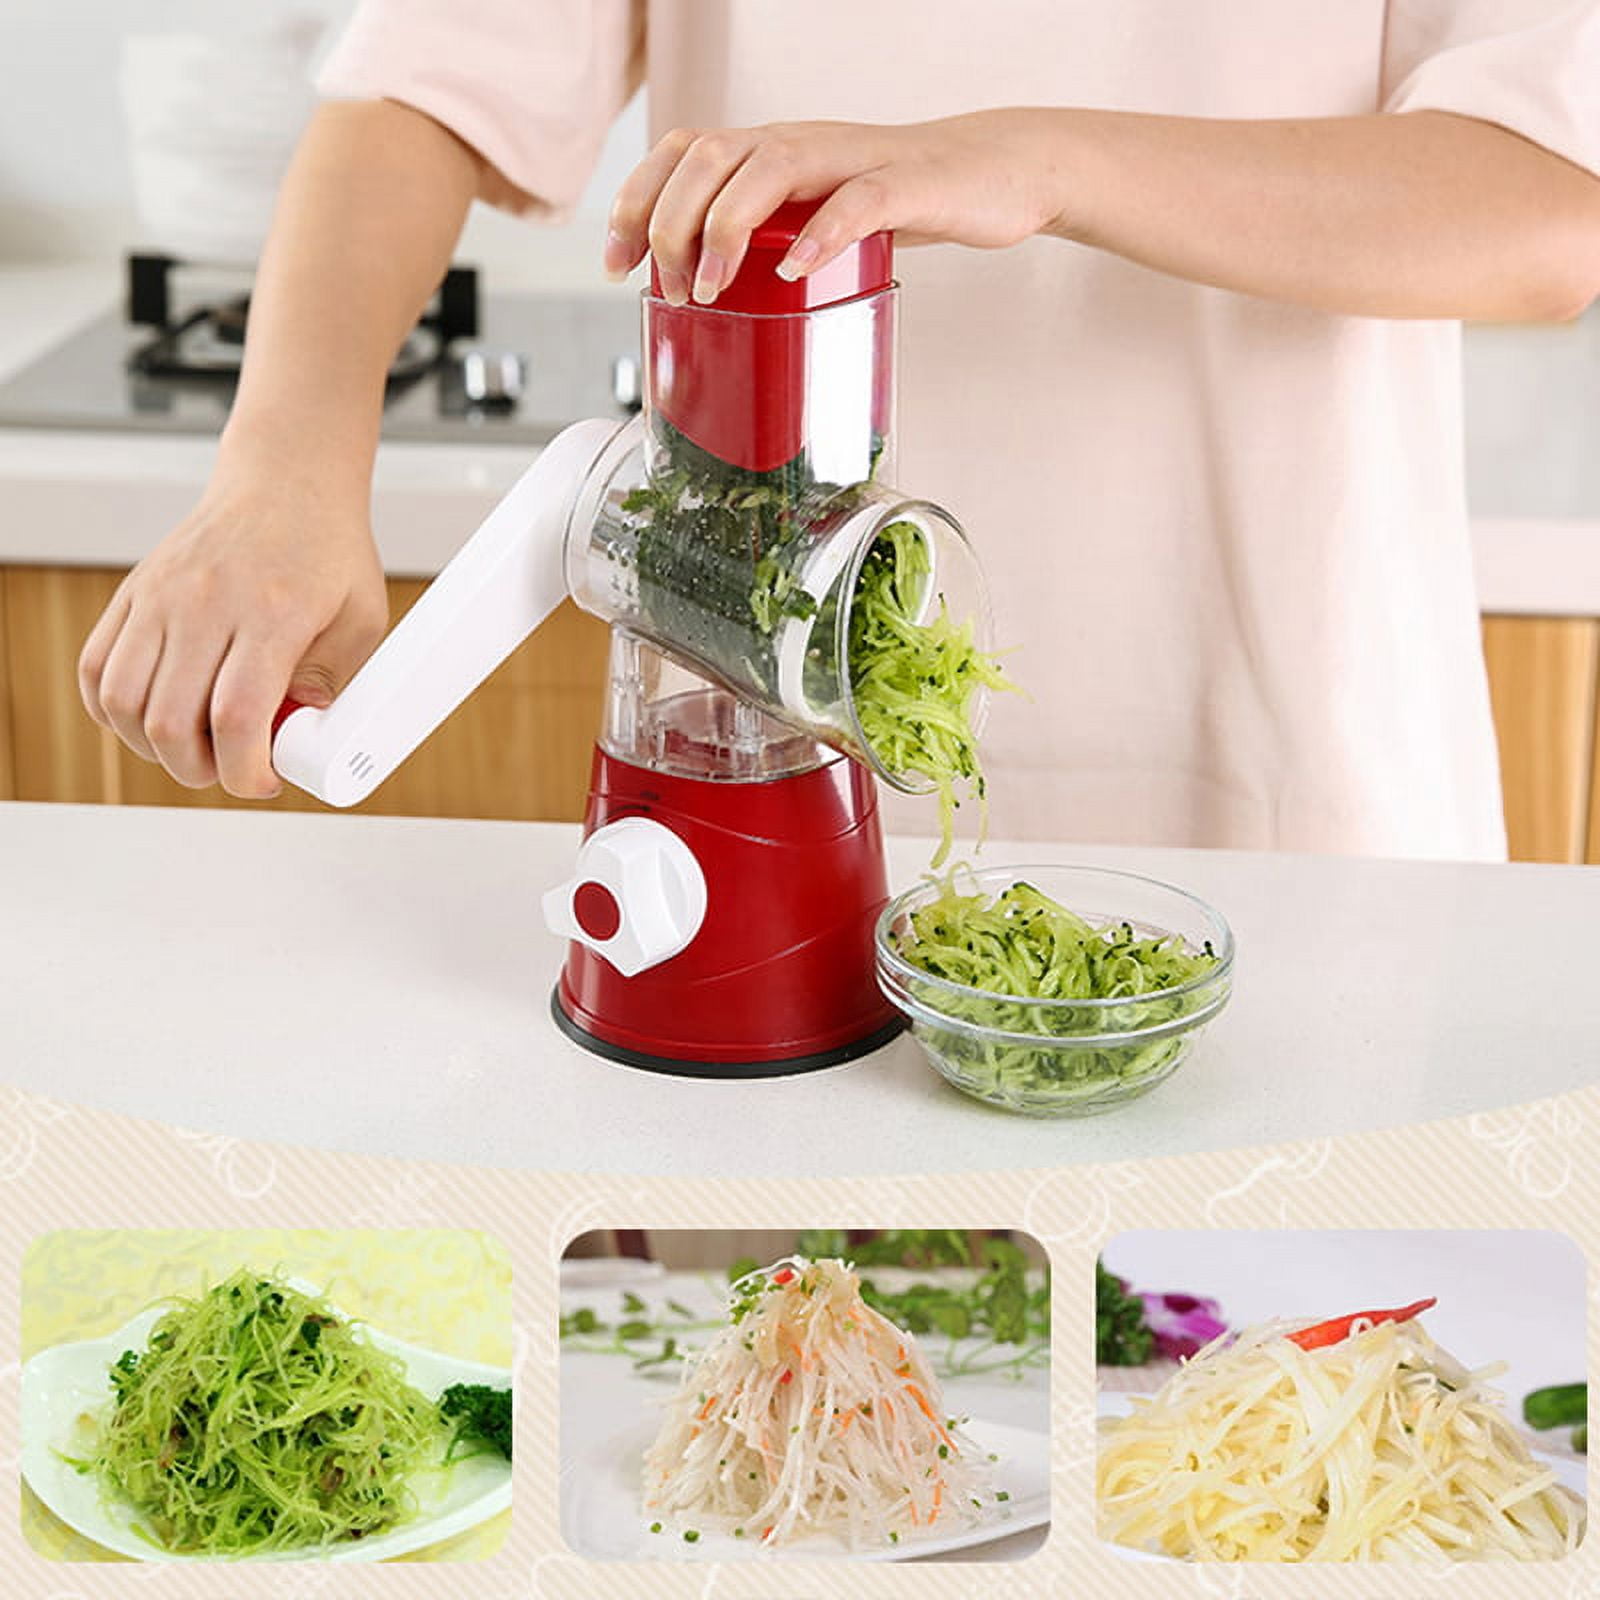 3 in 1 Hand Roller Type Cutting Machine, Multifunctional Stainless Steel  Vegetable Chopper Kitchen Tool with 3 Stainless Steel Blades Suitable for